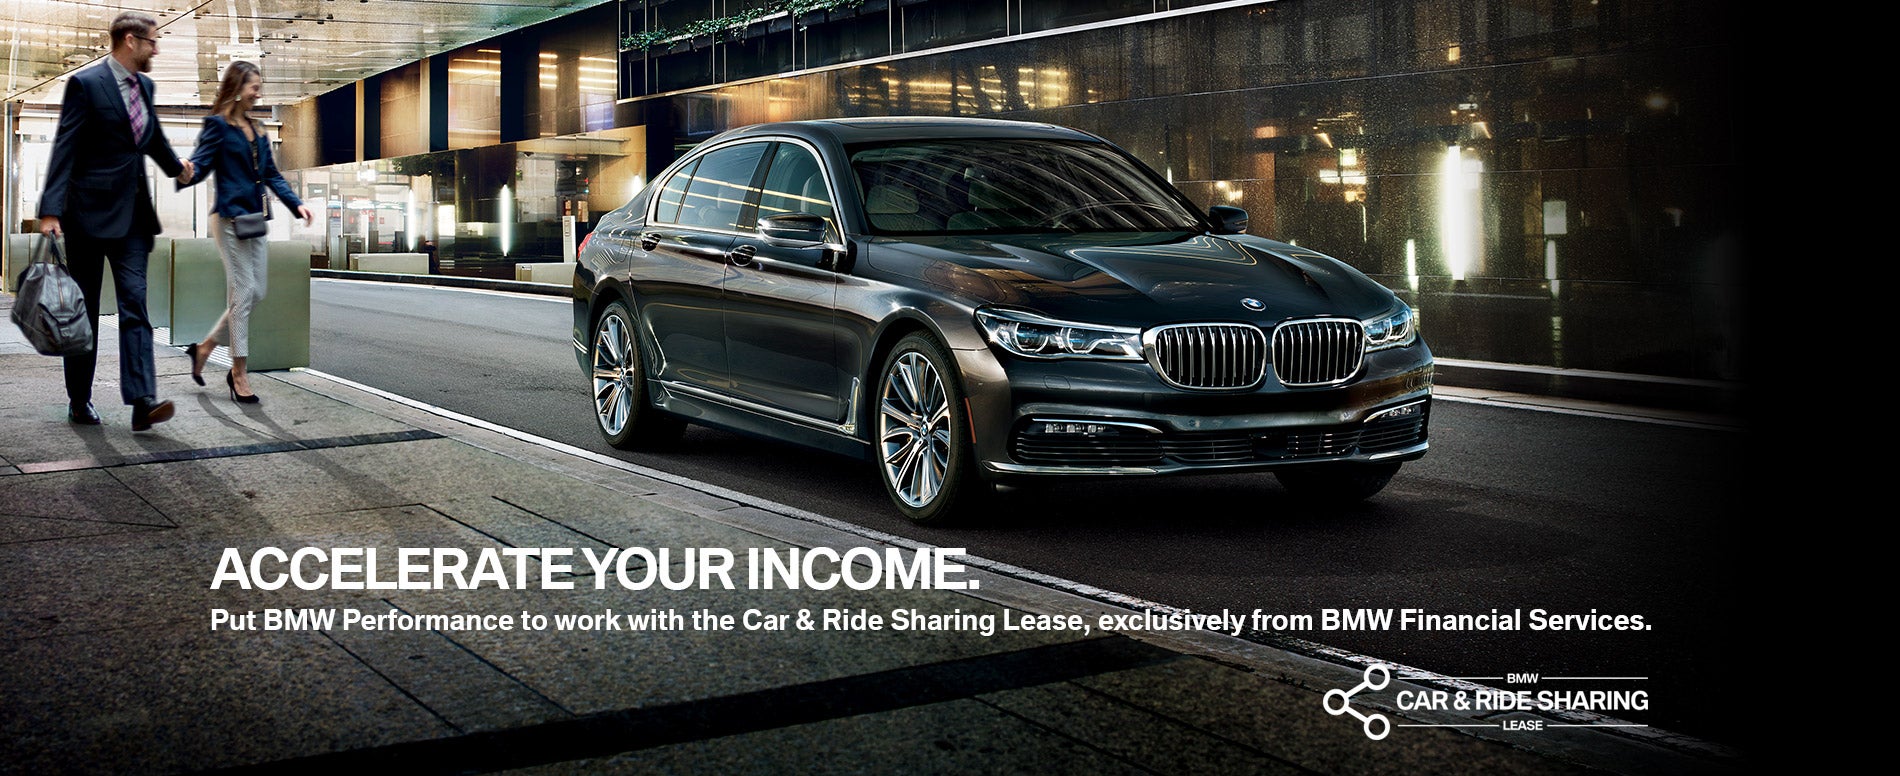 The BMW Car & Ride Sharing Lease at BMW of Bakersfield in Bakersfield CA